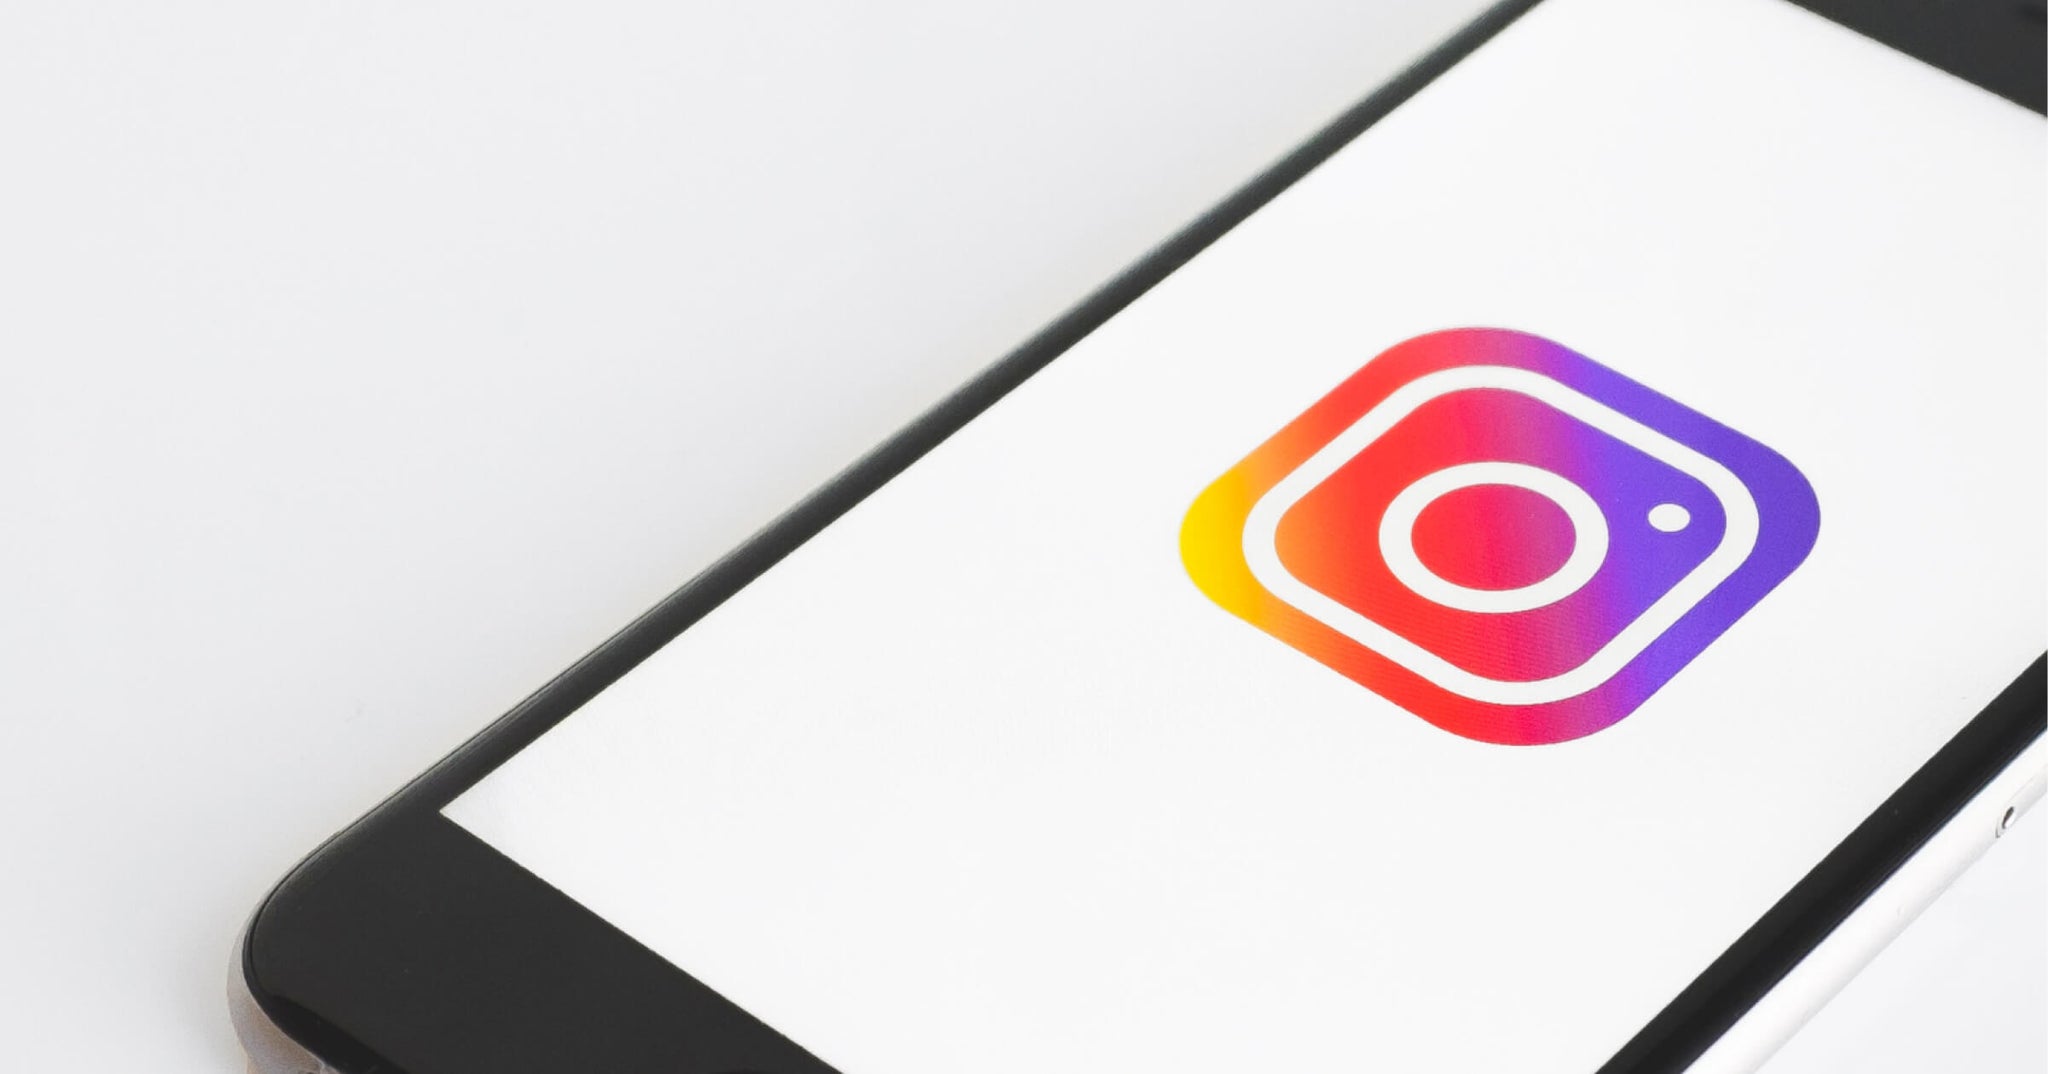 5 great content marketing ideas to for your Instagram account